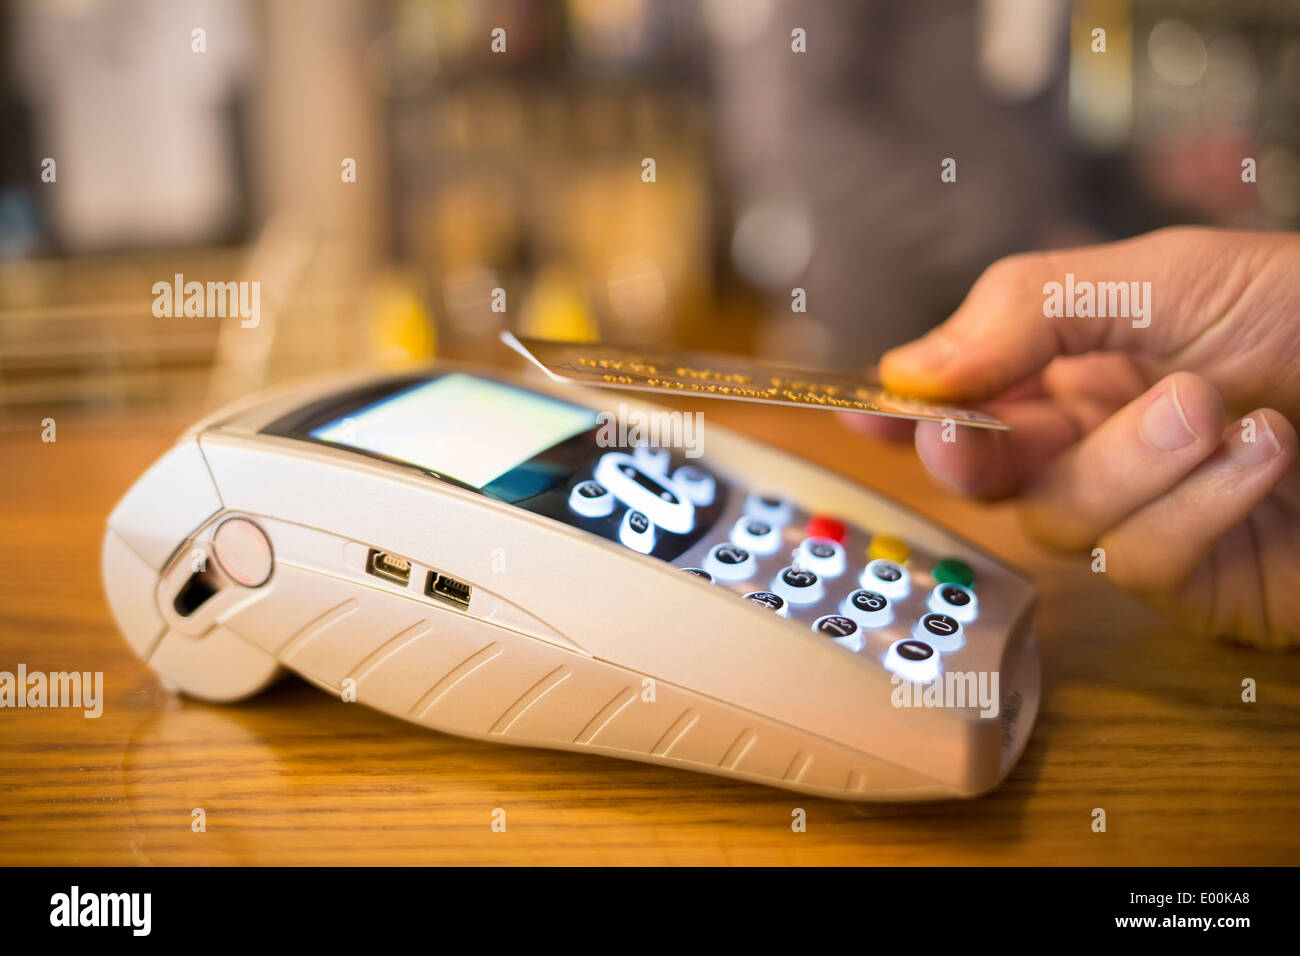 Male hand wallet payment shop Stock Photo